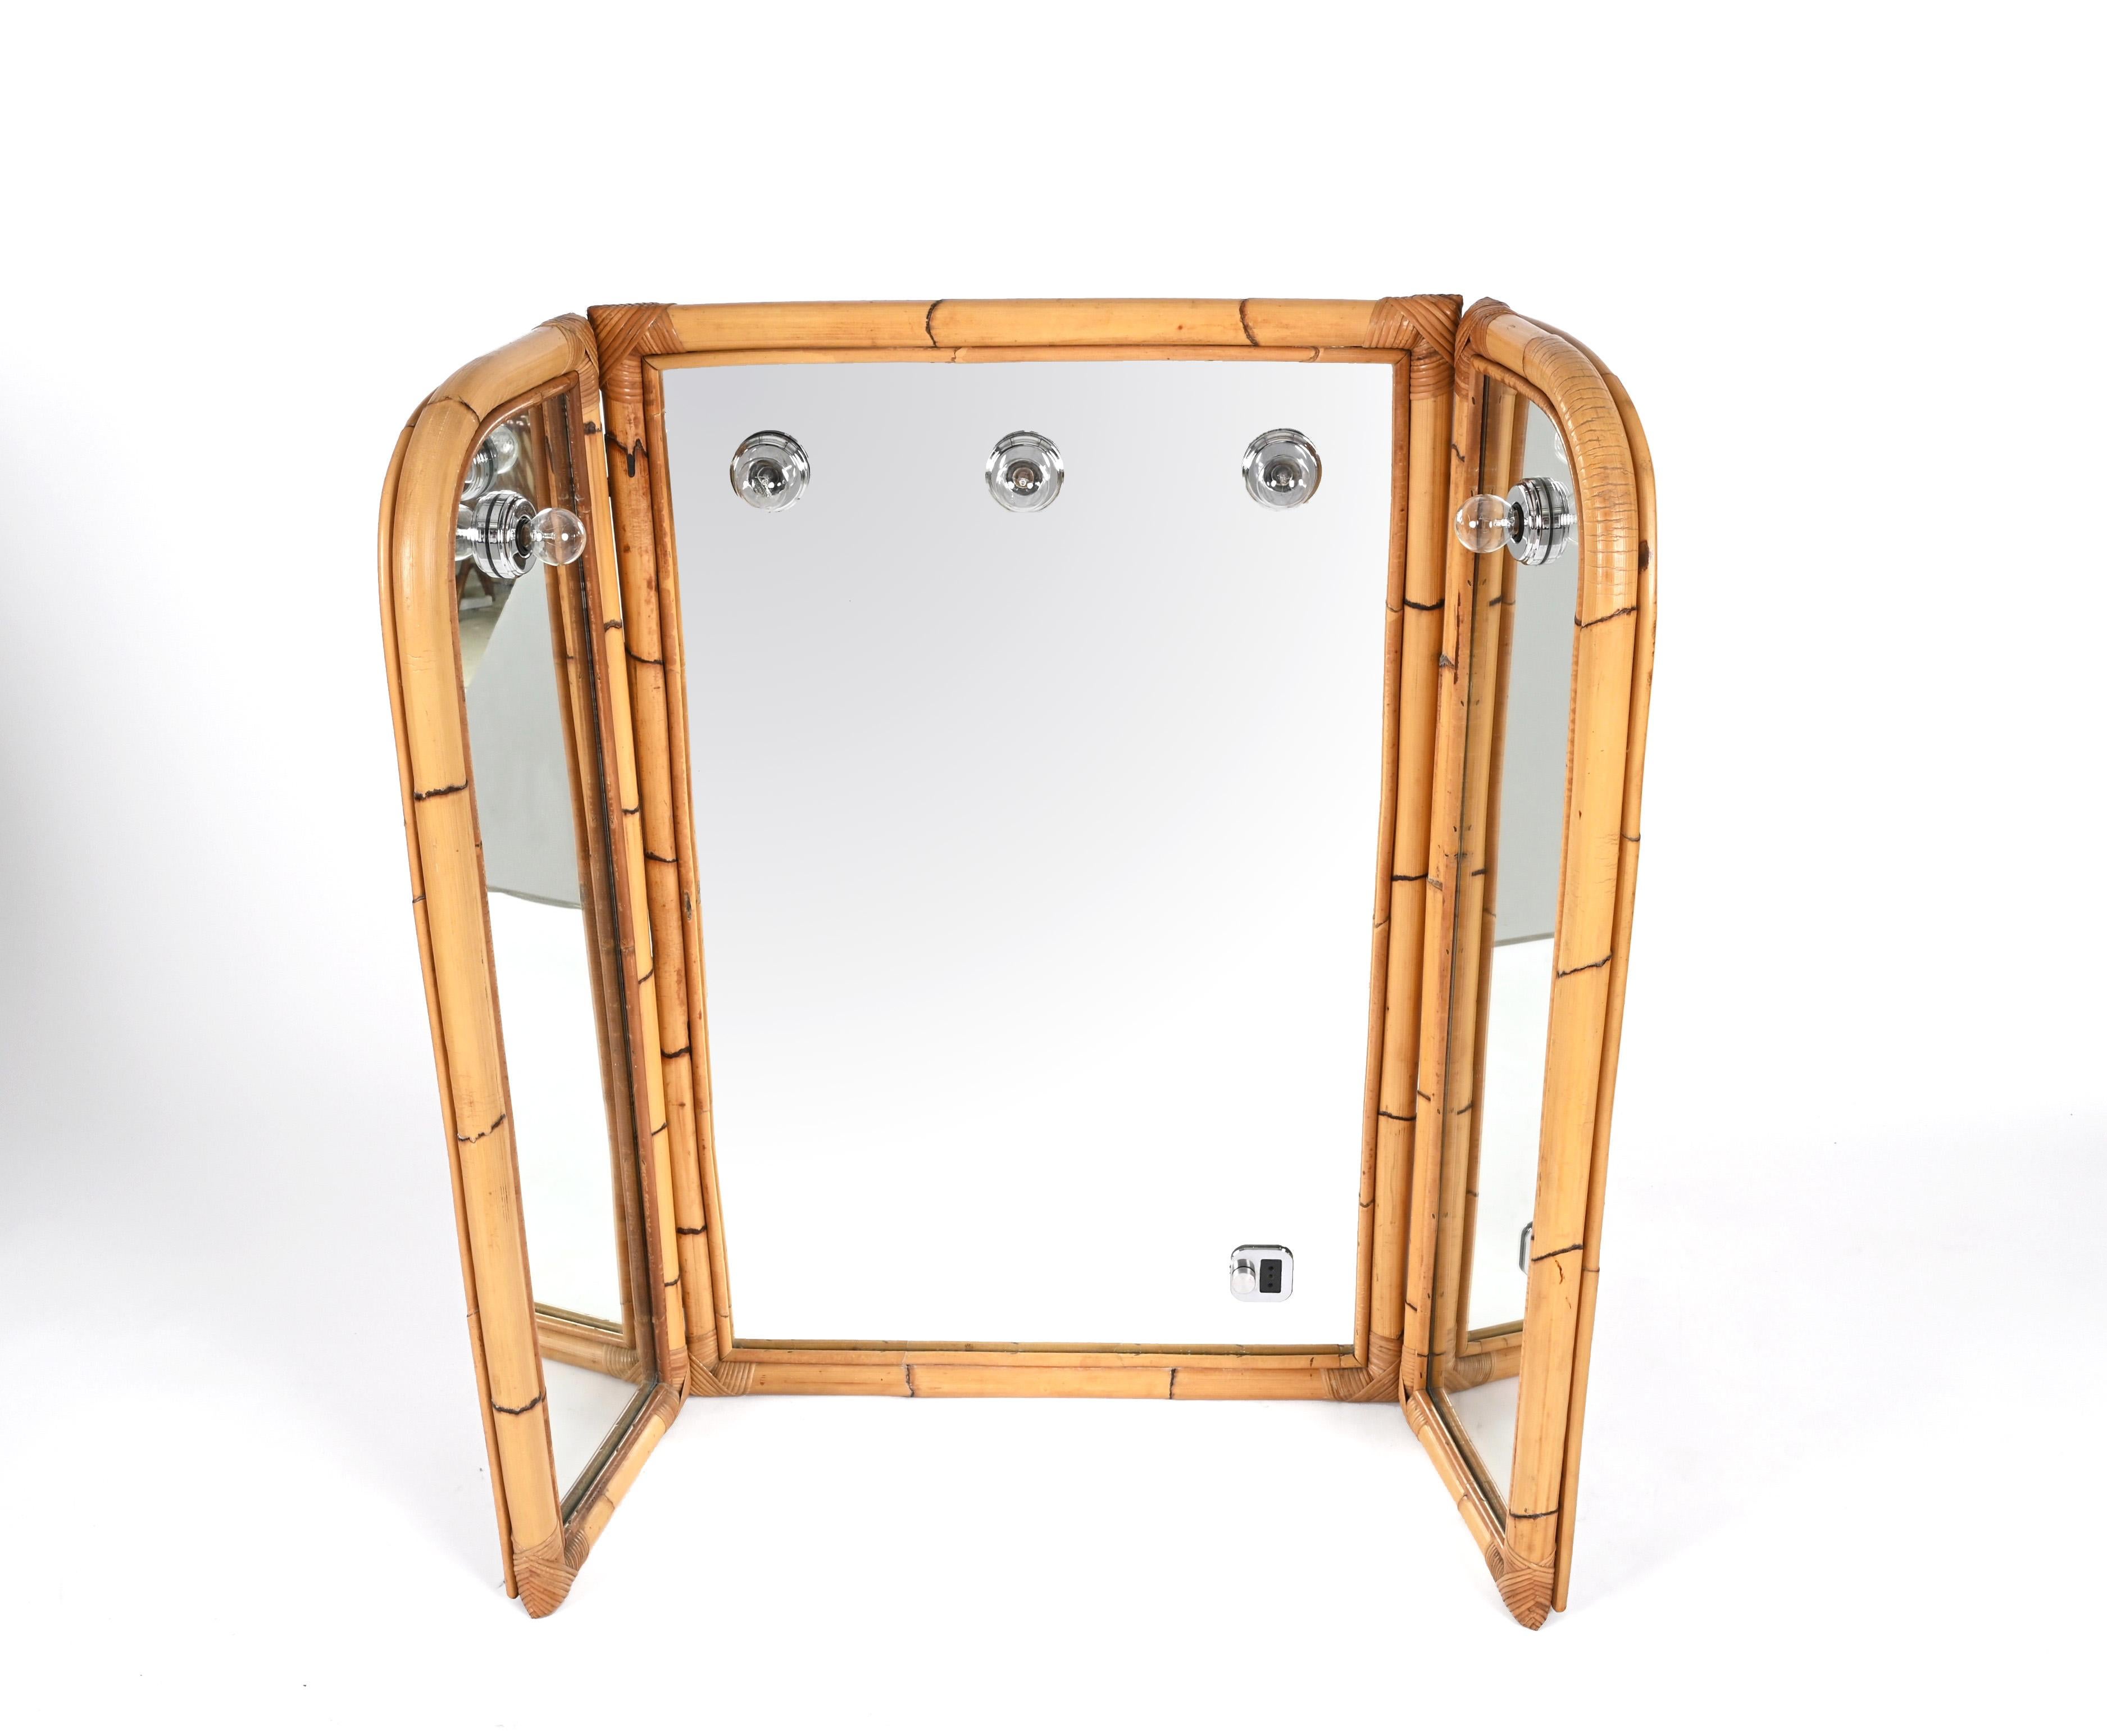 Midcentury Italian Triple Folding Bamboo Mirror with Dimmable Lighting, 1970s For Sale 4